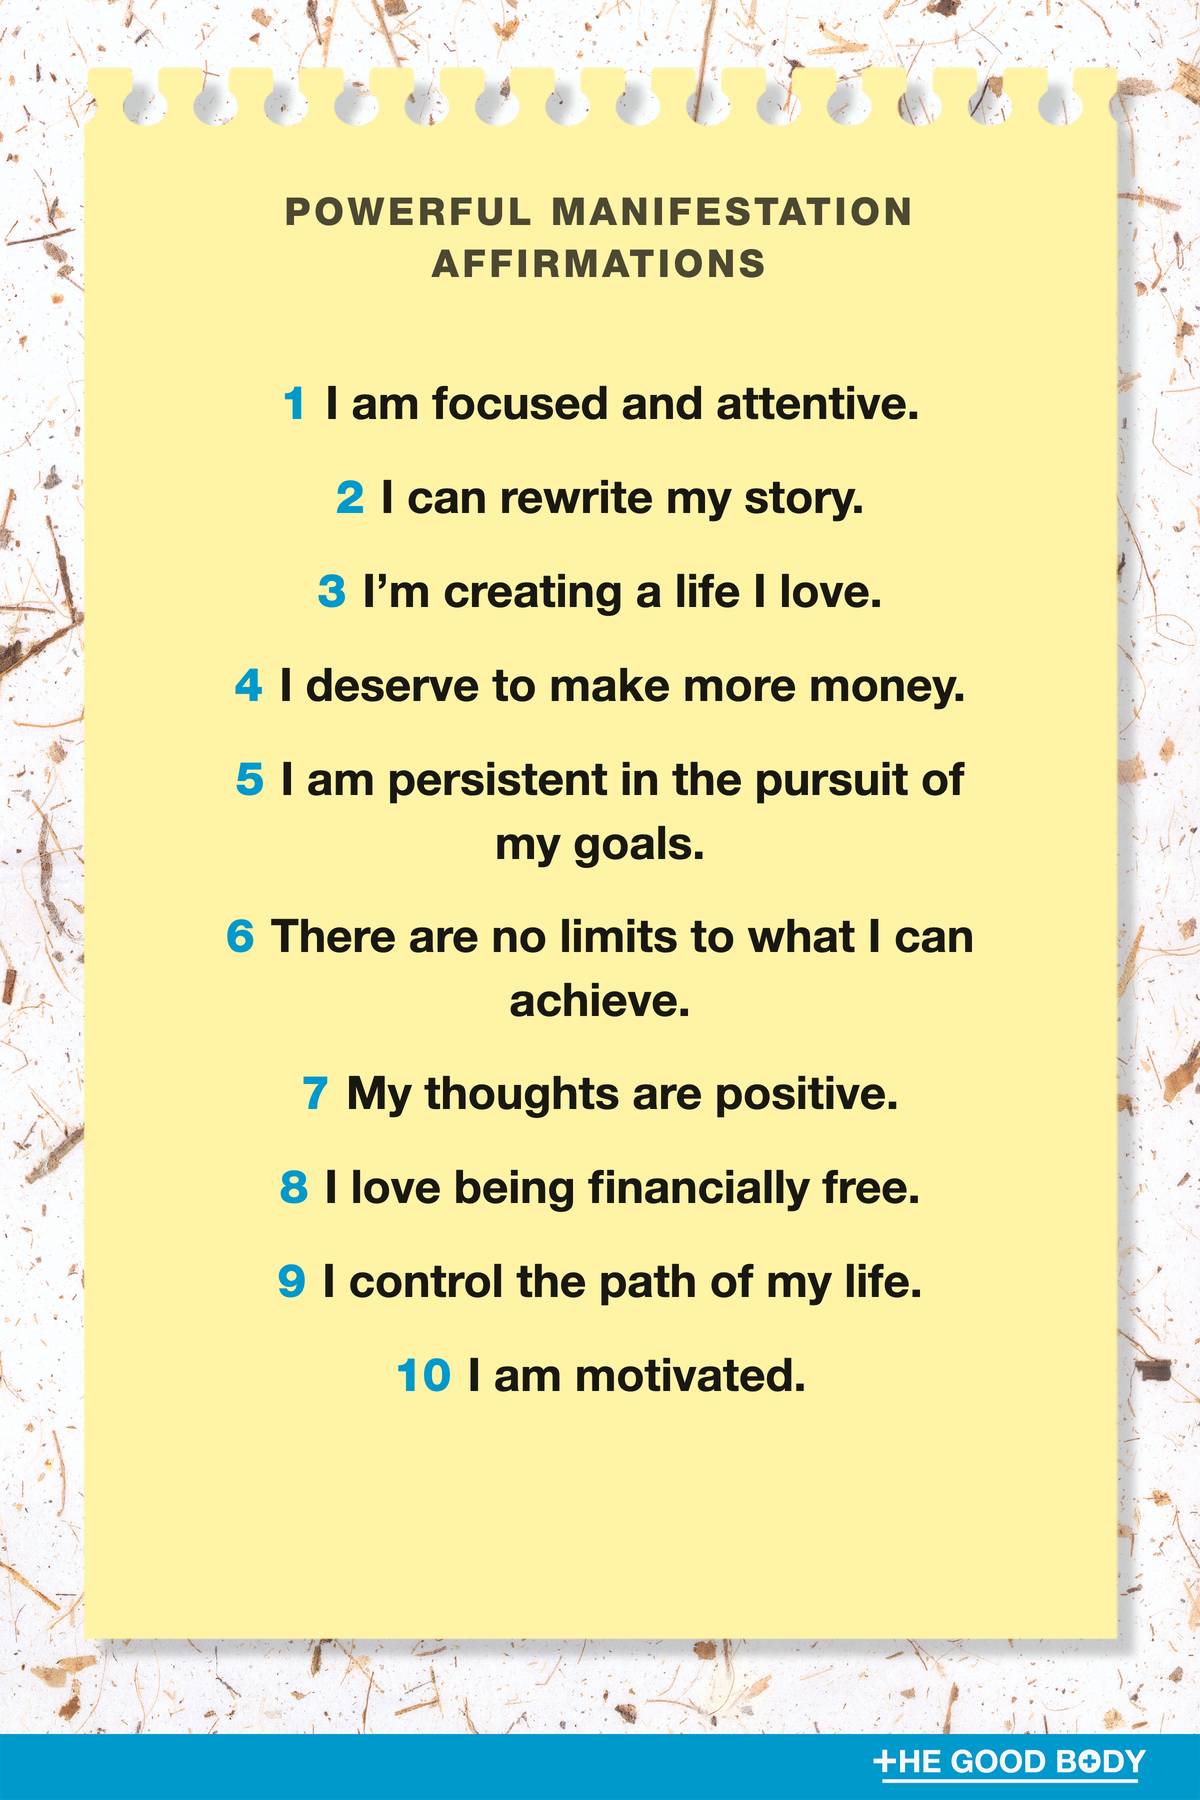 10 Powerful Manifestation Affirmations on Yellow Note Paper with Recycled Paper Background